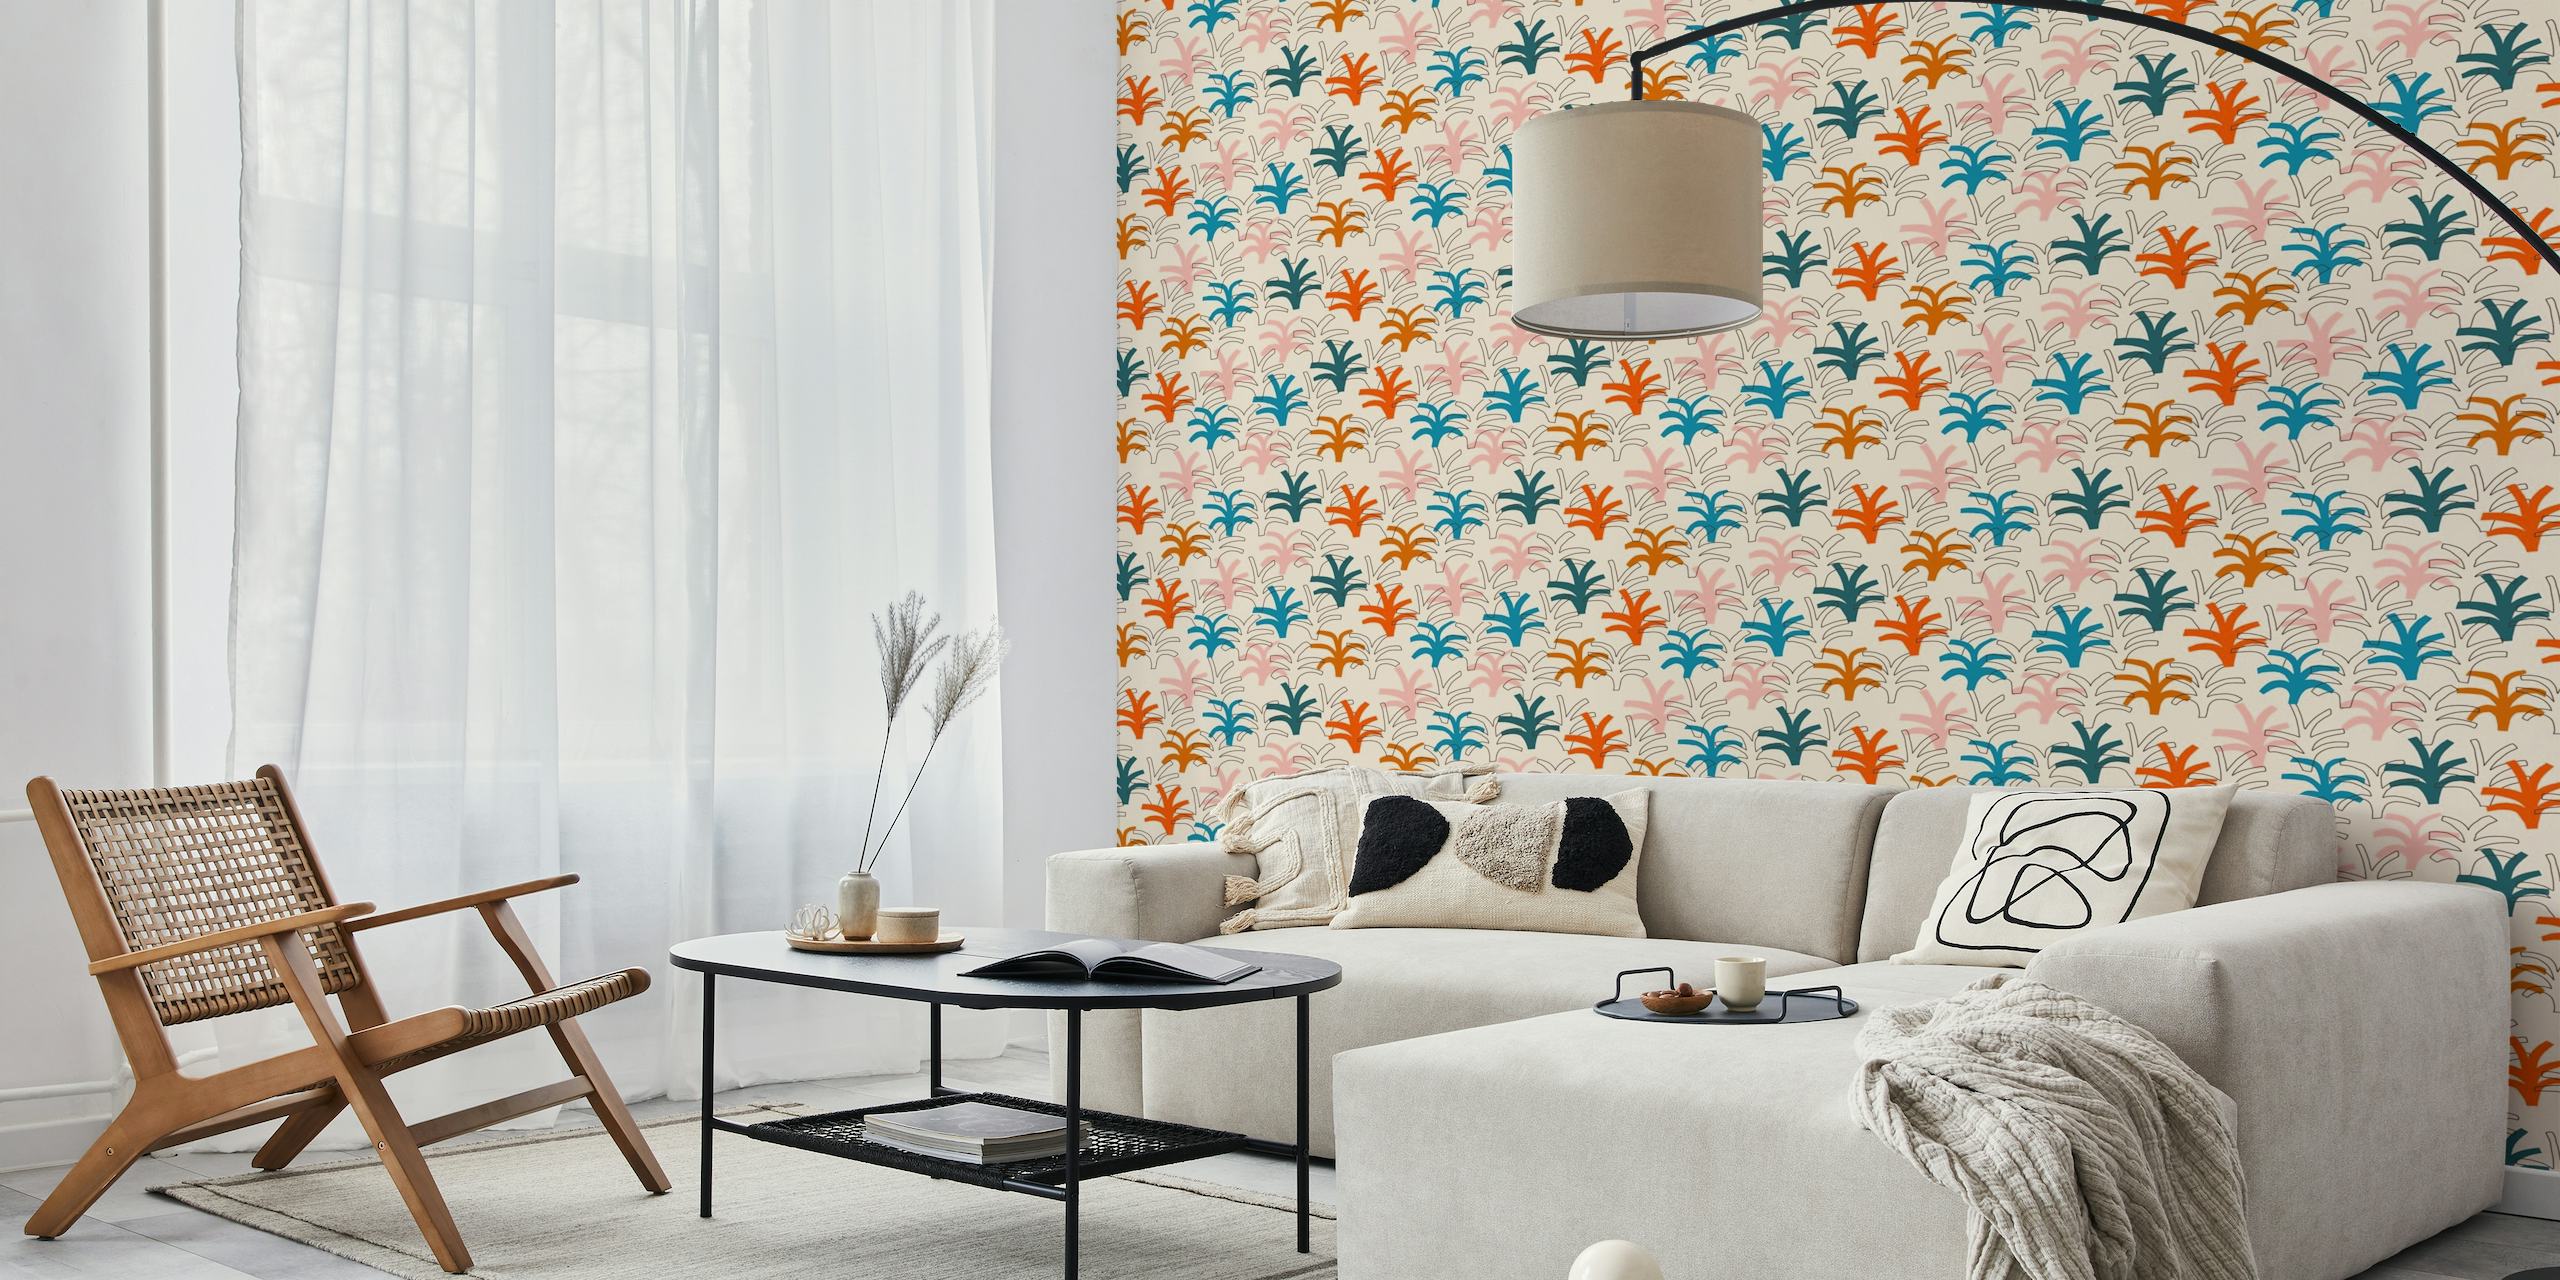 Colorful abstract palm pattern wall mural on happywall.com